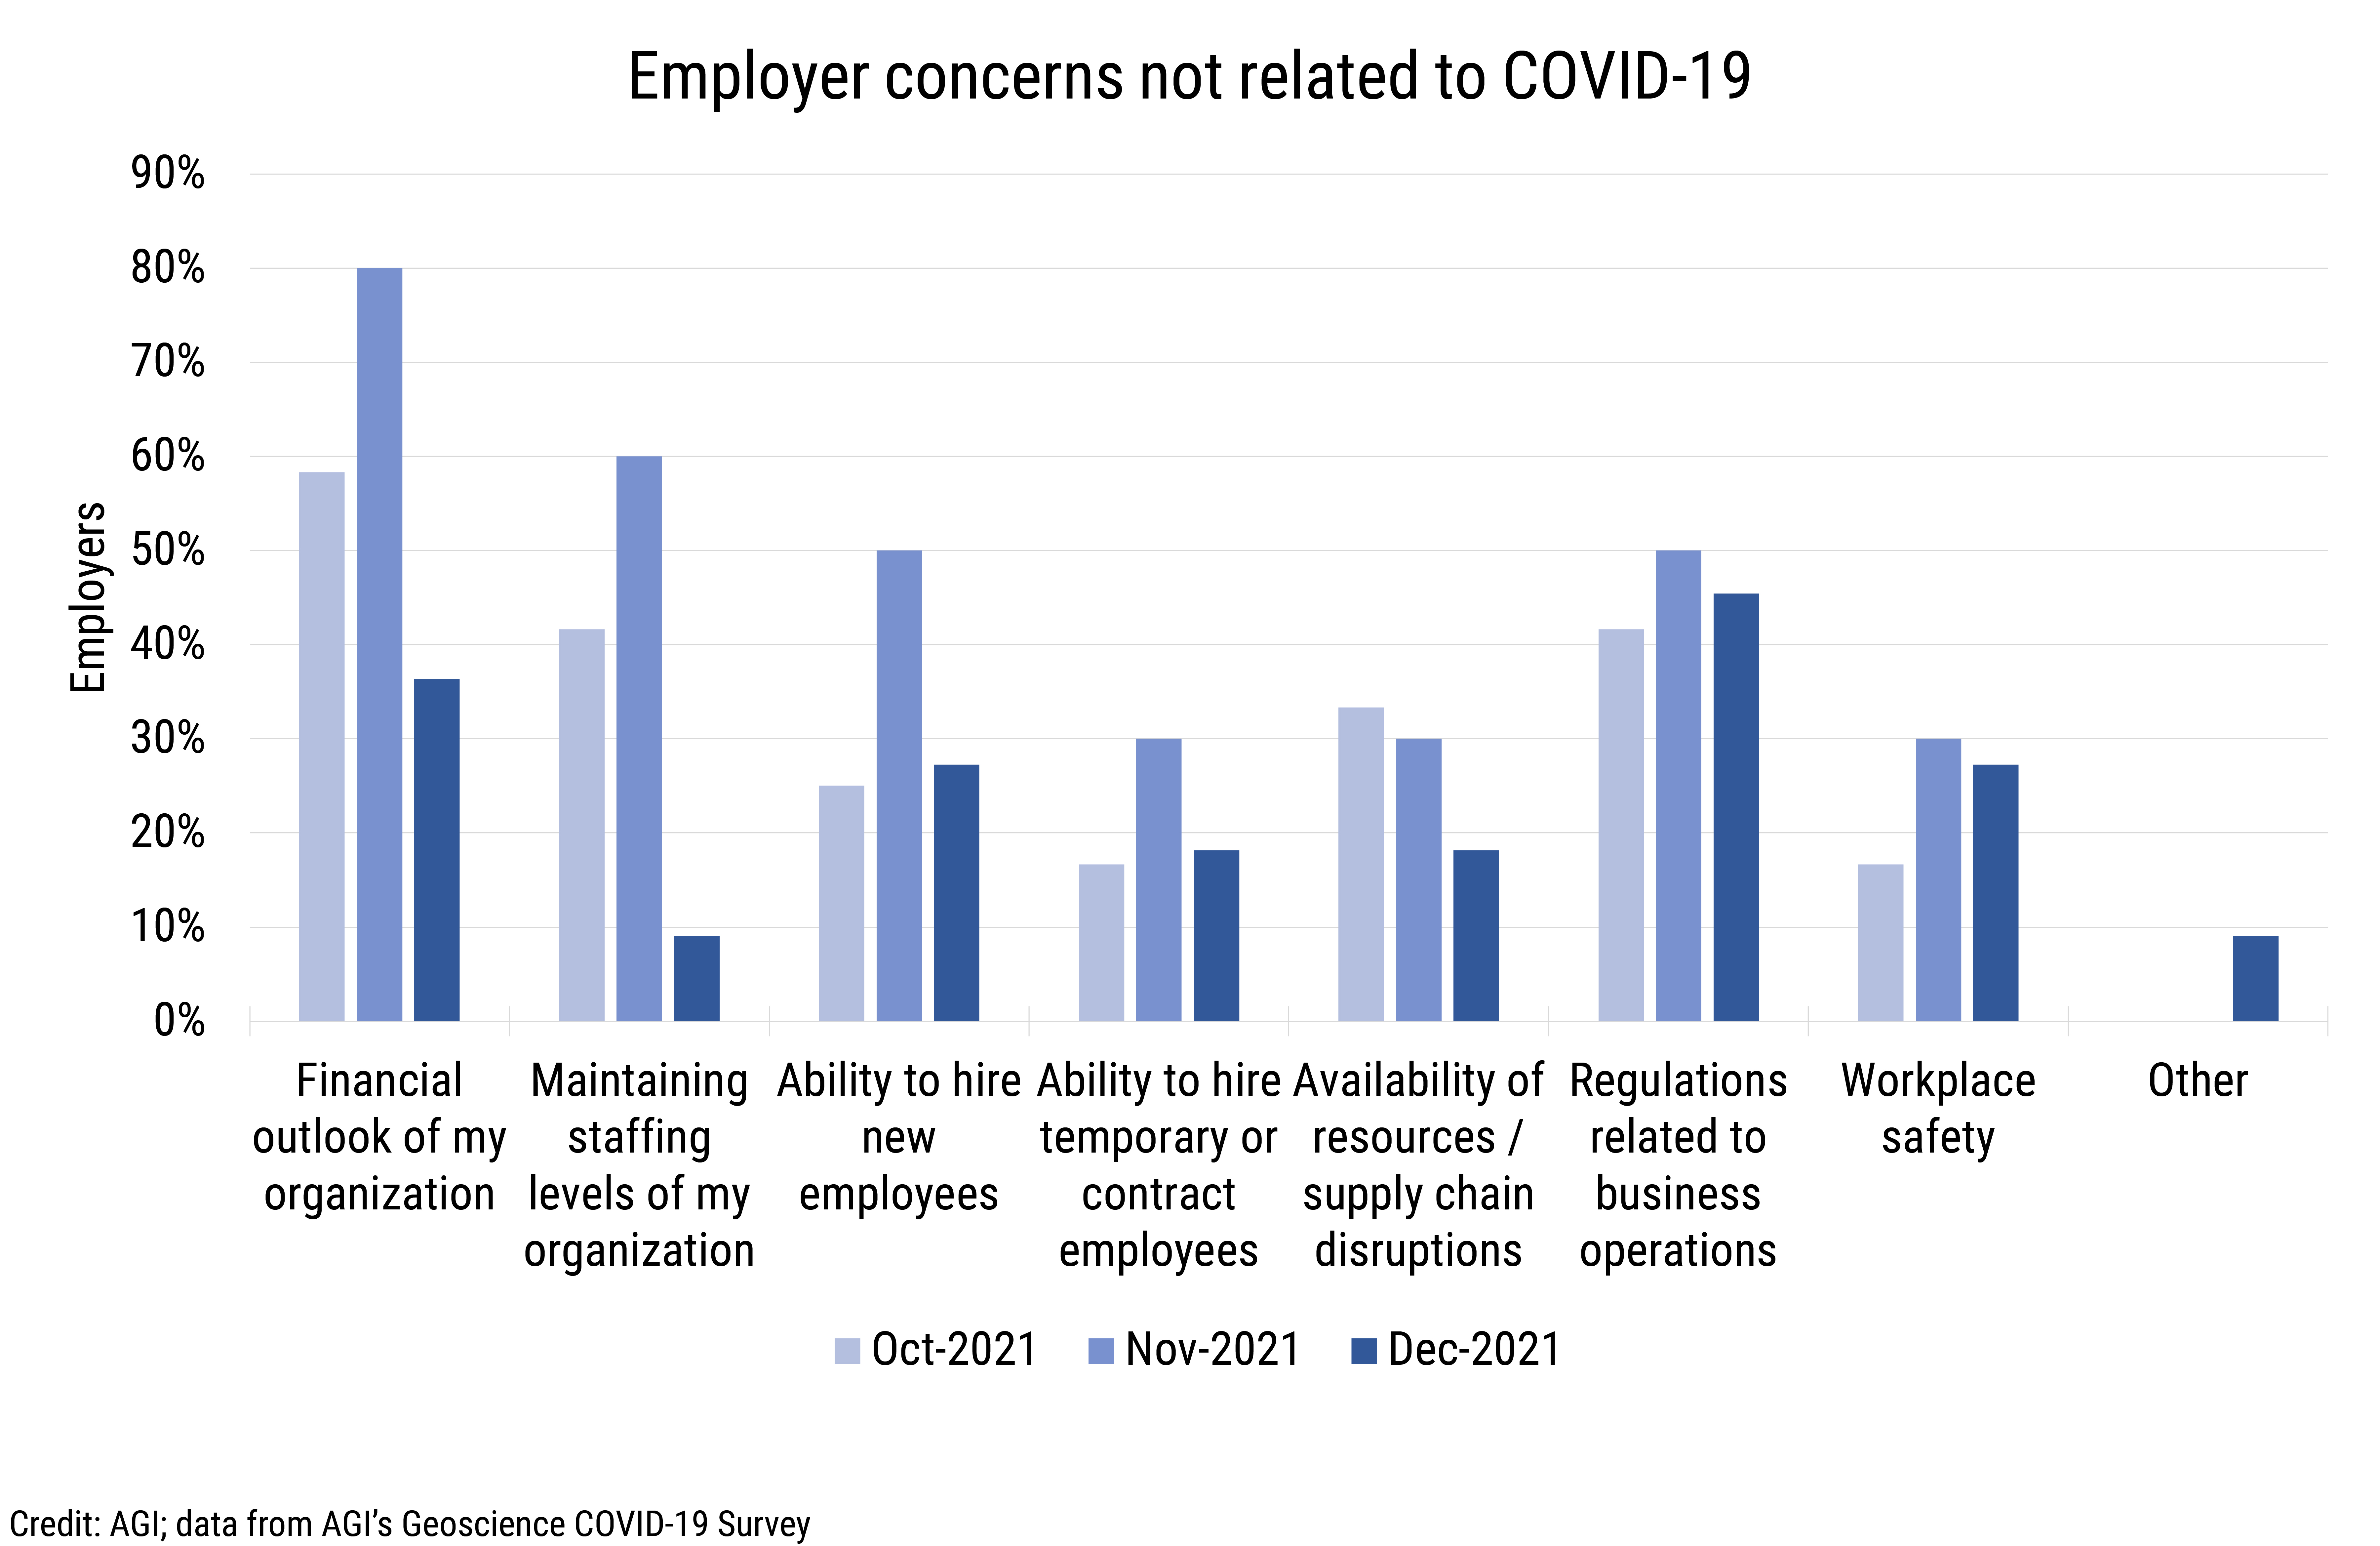 DB_2022-002 chart 13: Employer concerns not related to COVID-19 (Credit: AGI; data from AGI's Geoscience COVID-19 Survey)